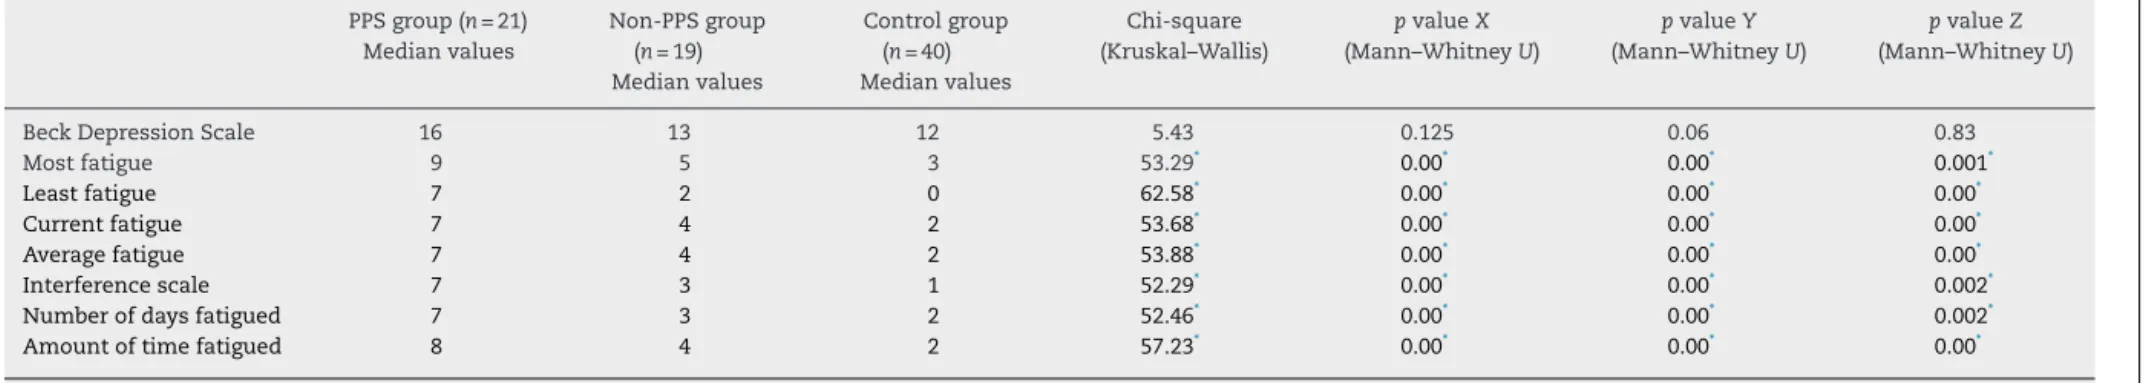 Table 4 – Comparison of QoL between the groups.